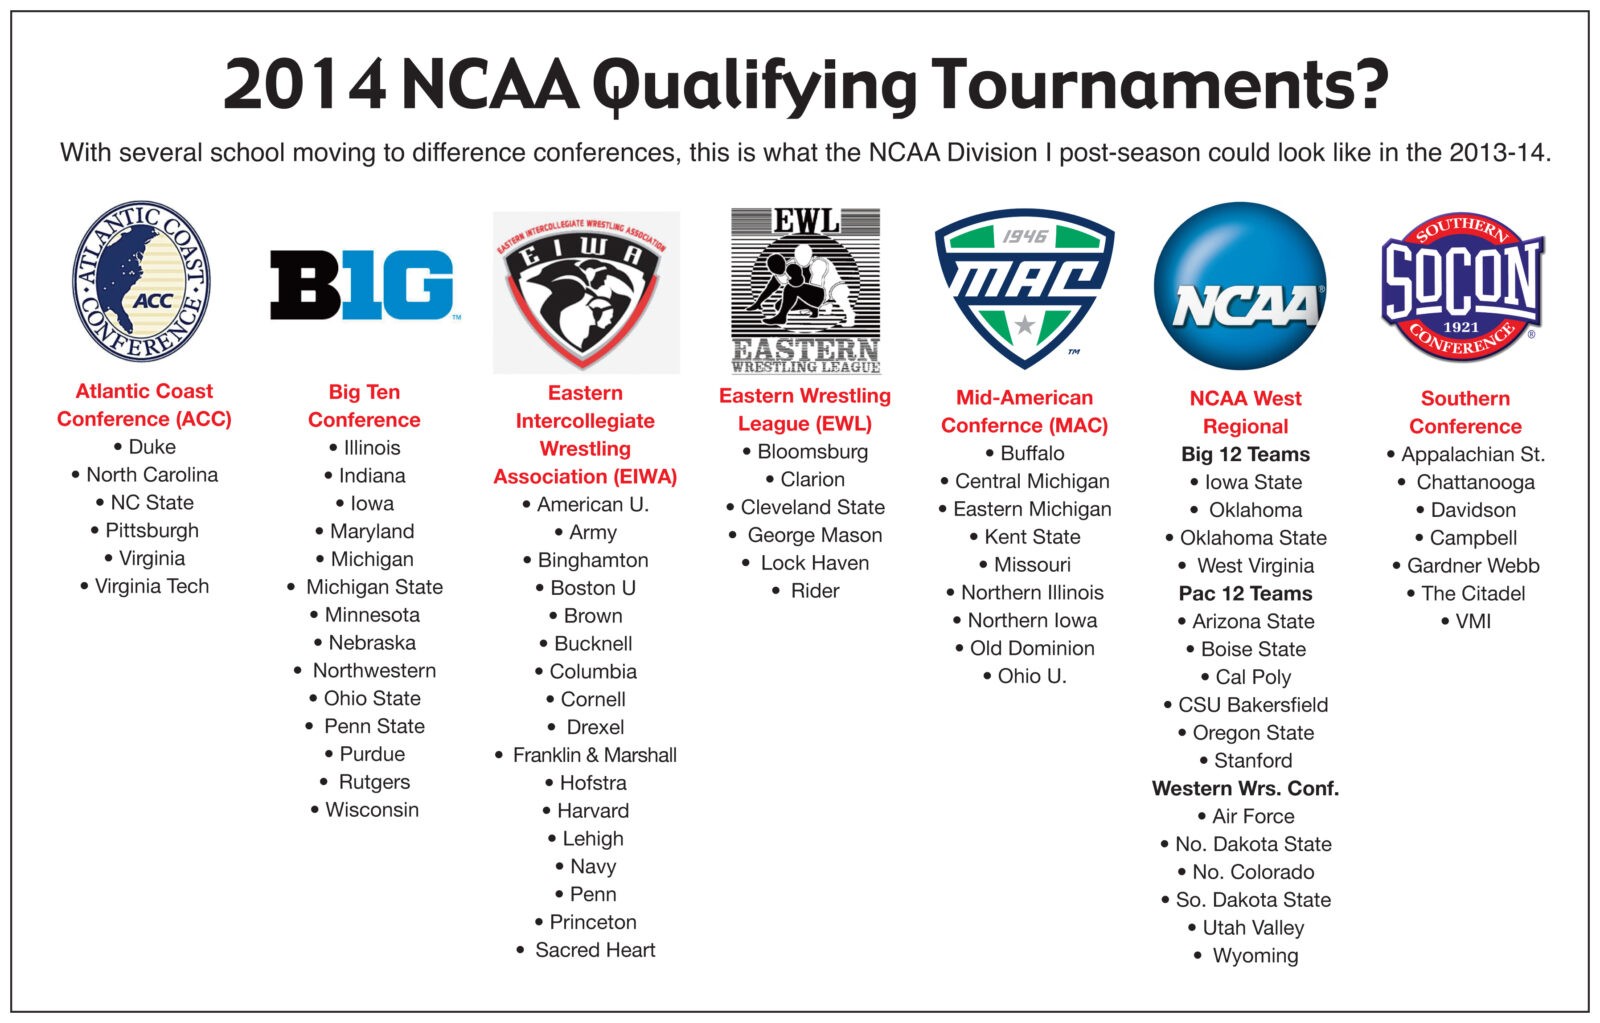 Newlook NCAA qualifiers include evergrowing EIWA and possible merger